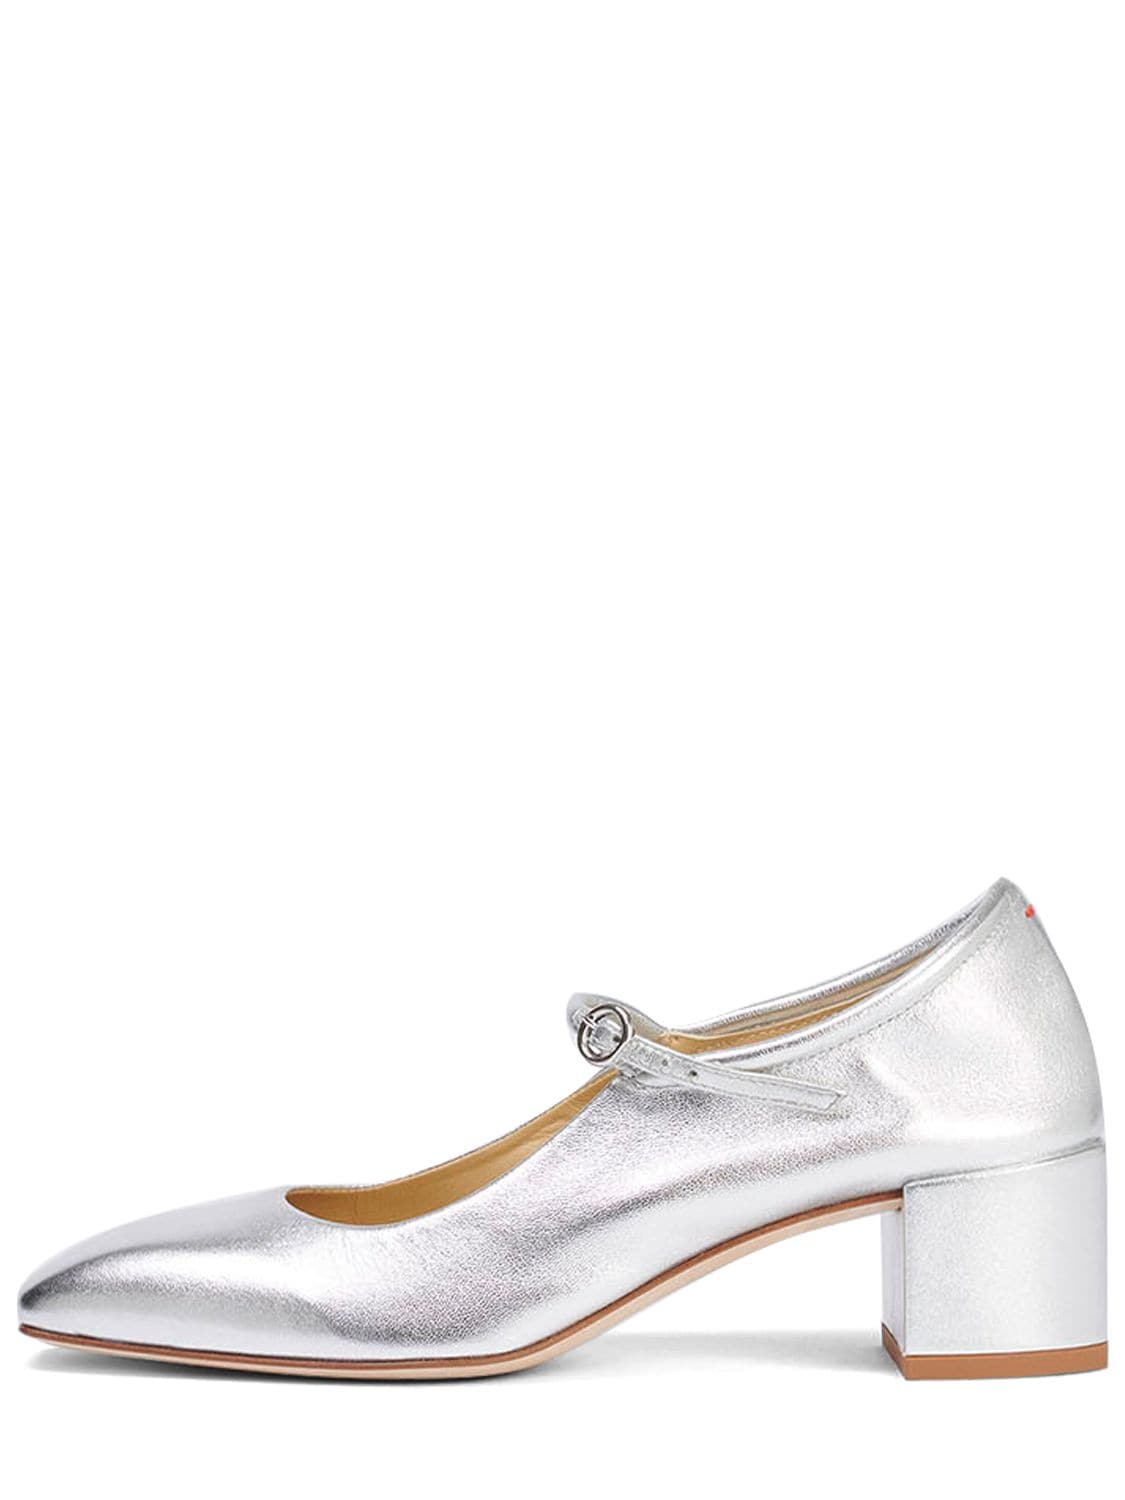 AEYDE 45MM ALINE LAMINATED LEATHER PUMPS